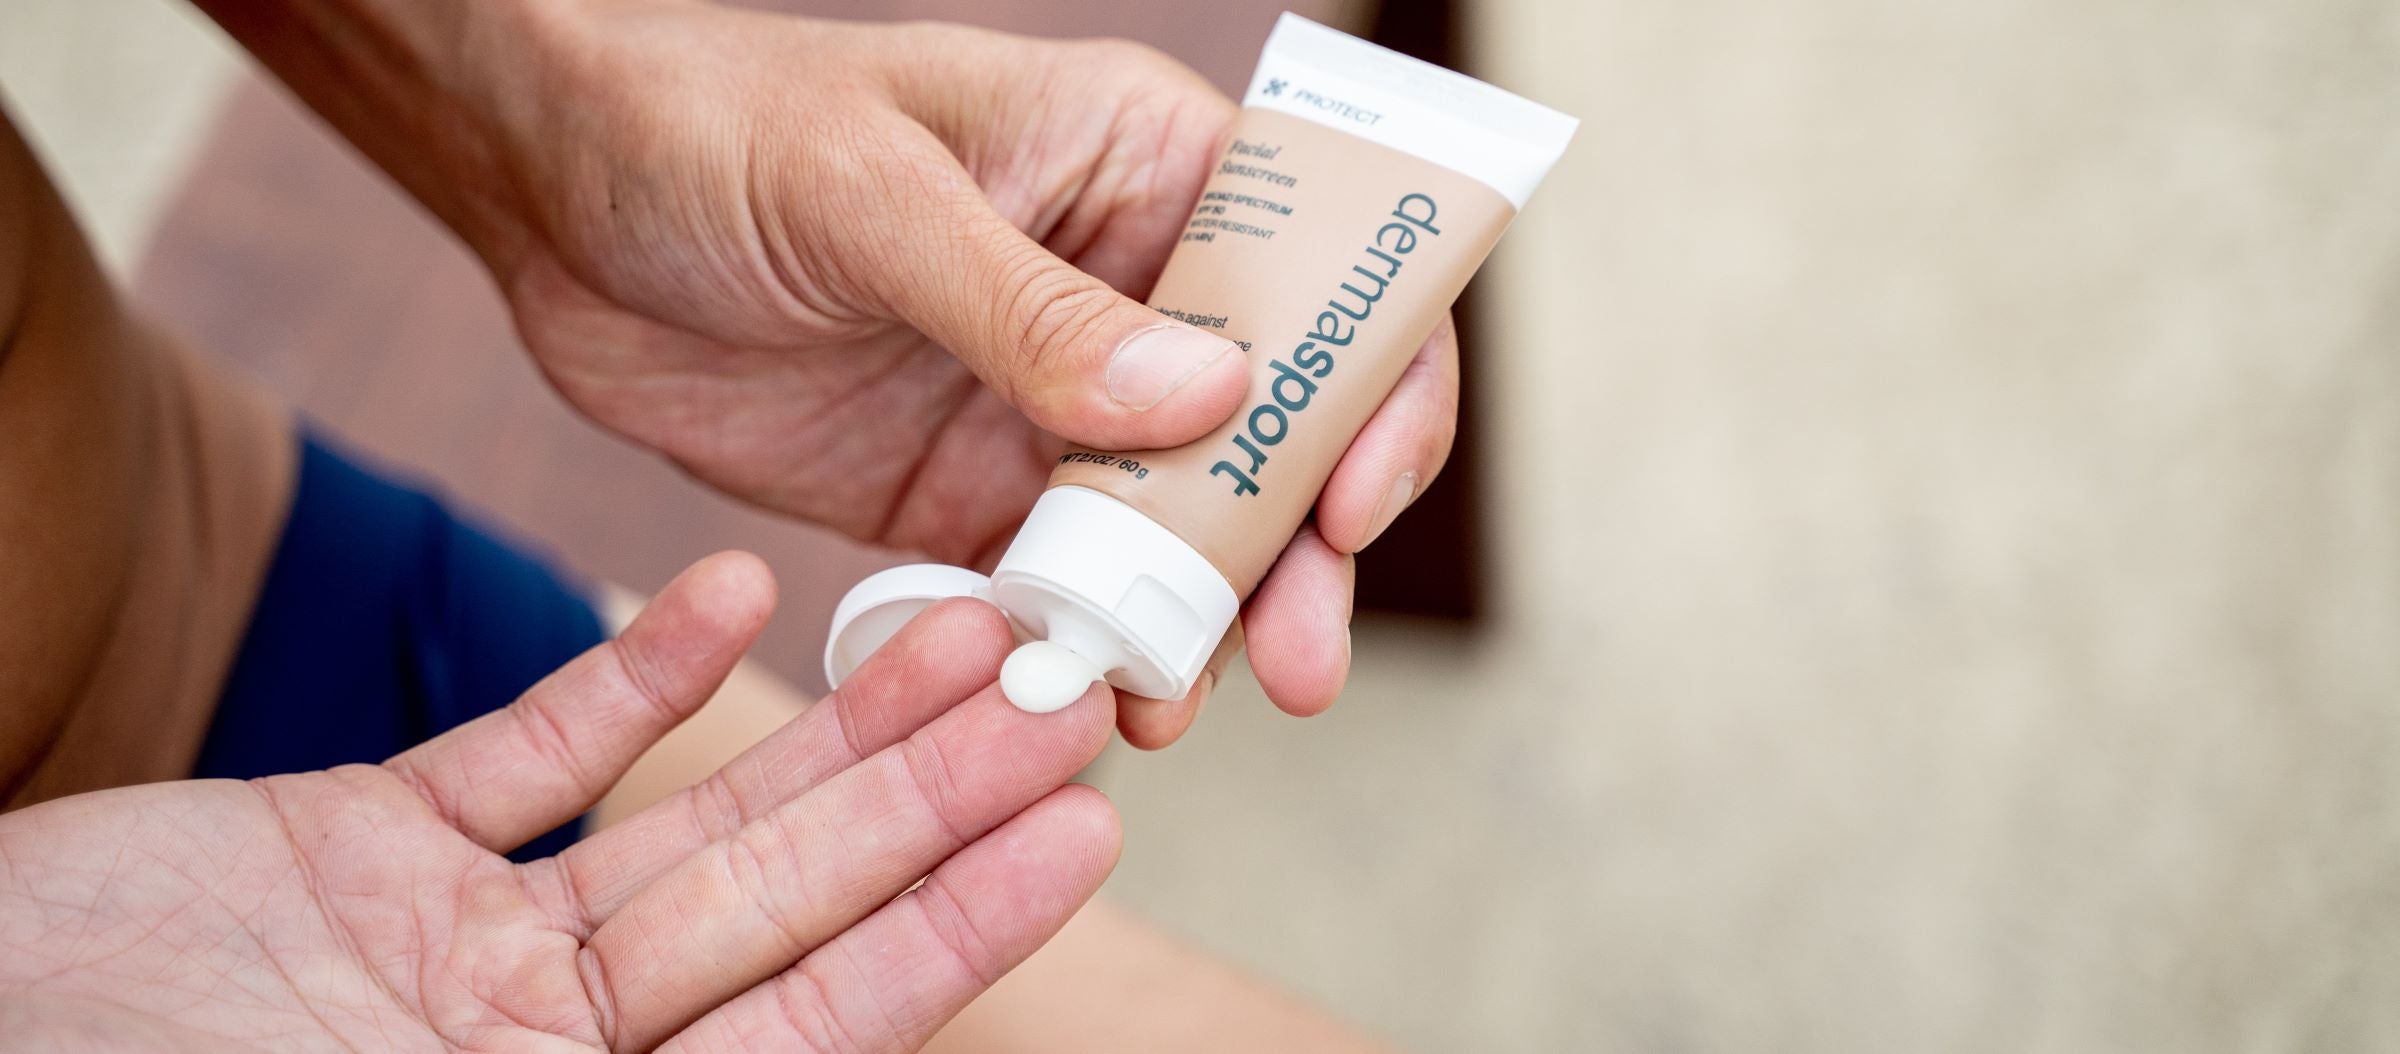 What Makes Sunscreen Water Resistant?